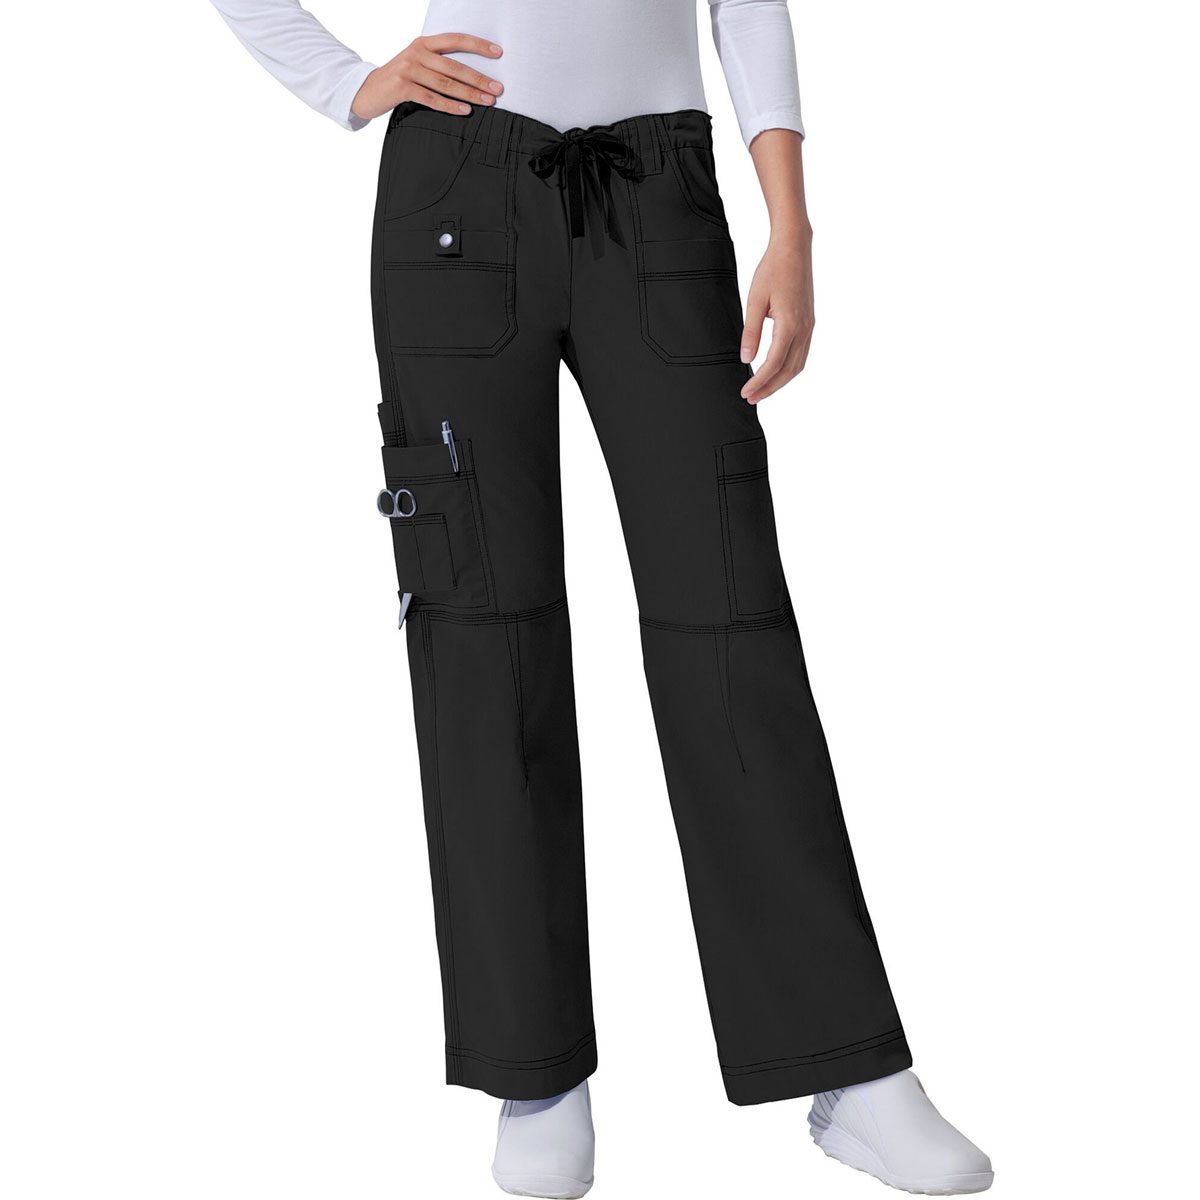 9 Best Work Cargo and Carpenter Pants for Women in the Trades | The ...